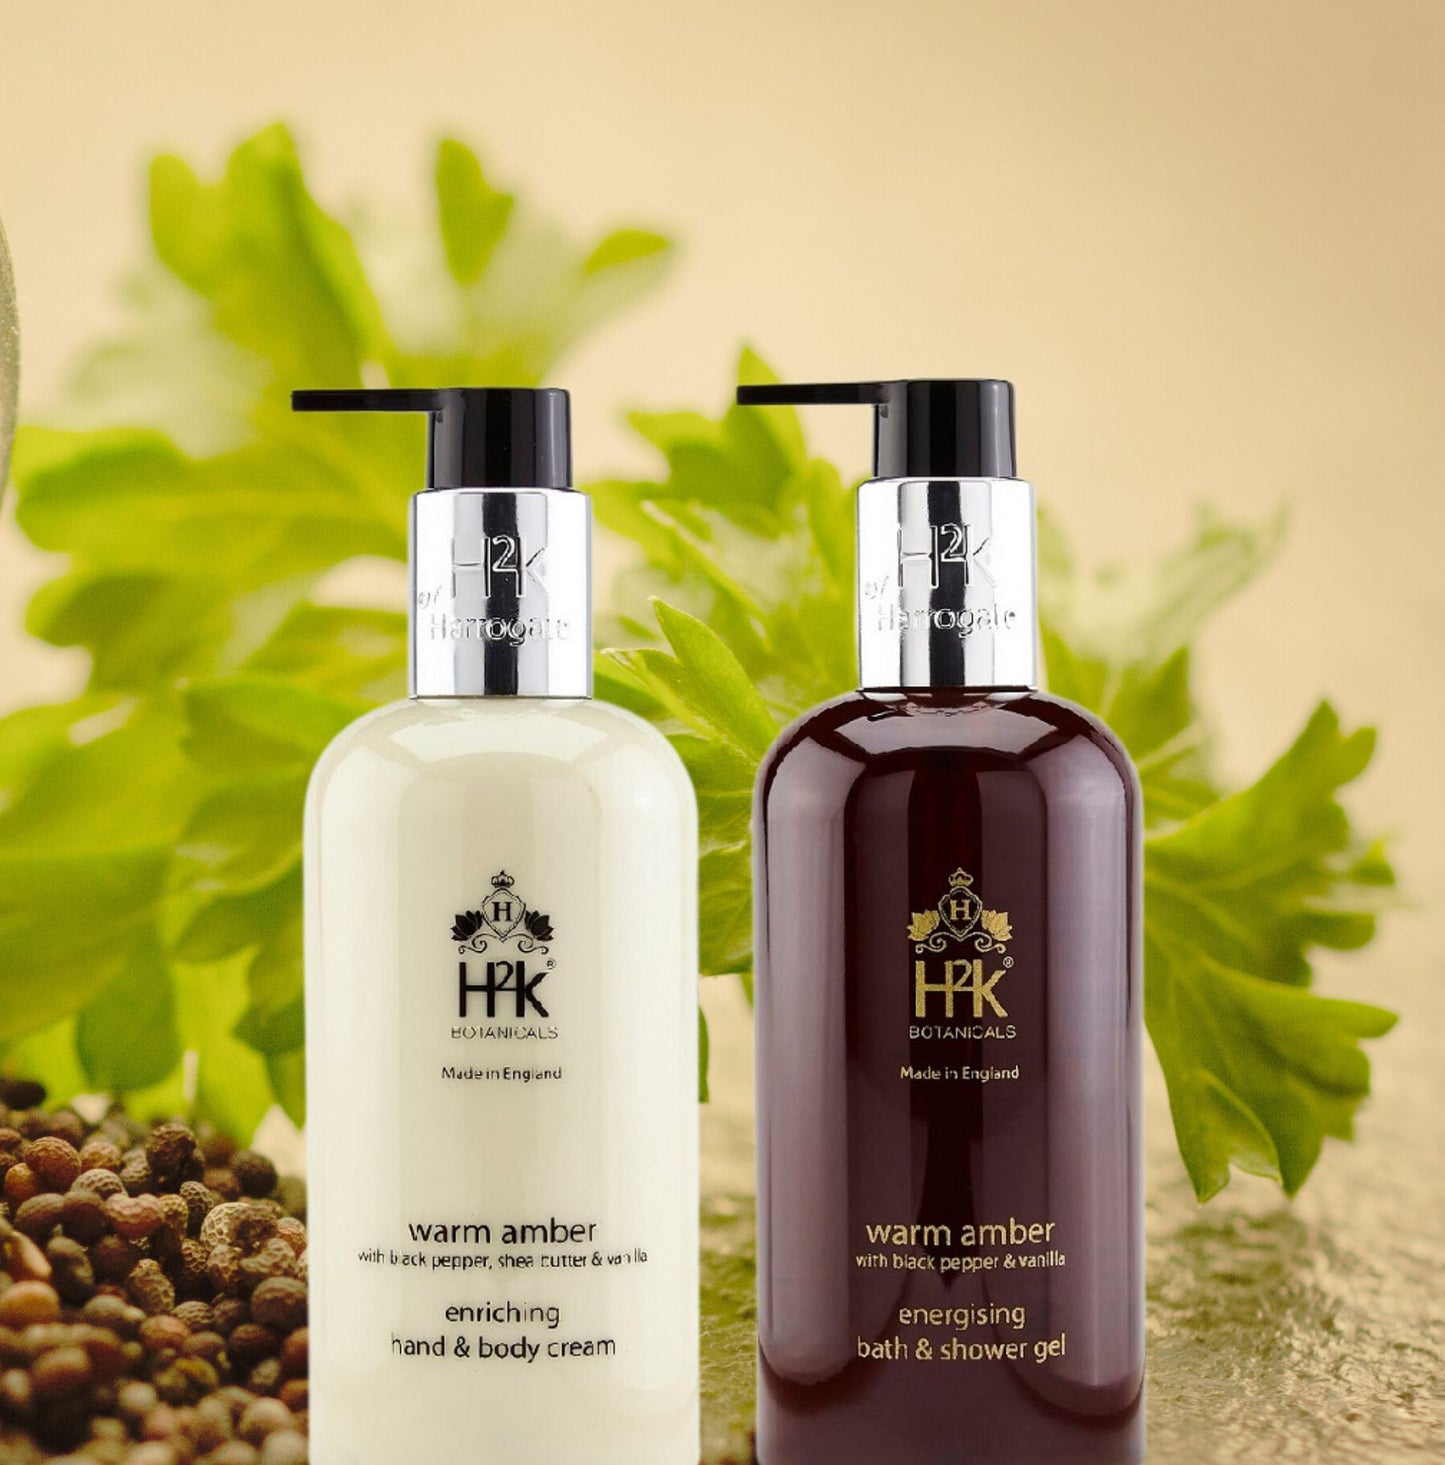 Black Pepper and Vanilla Body Care Gift - Warm Amber Collection